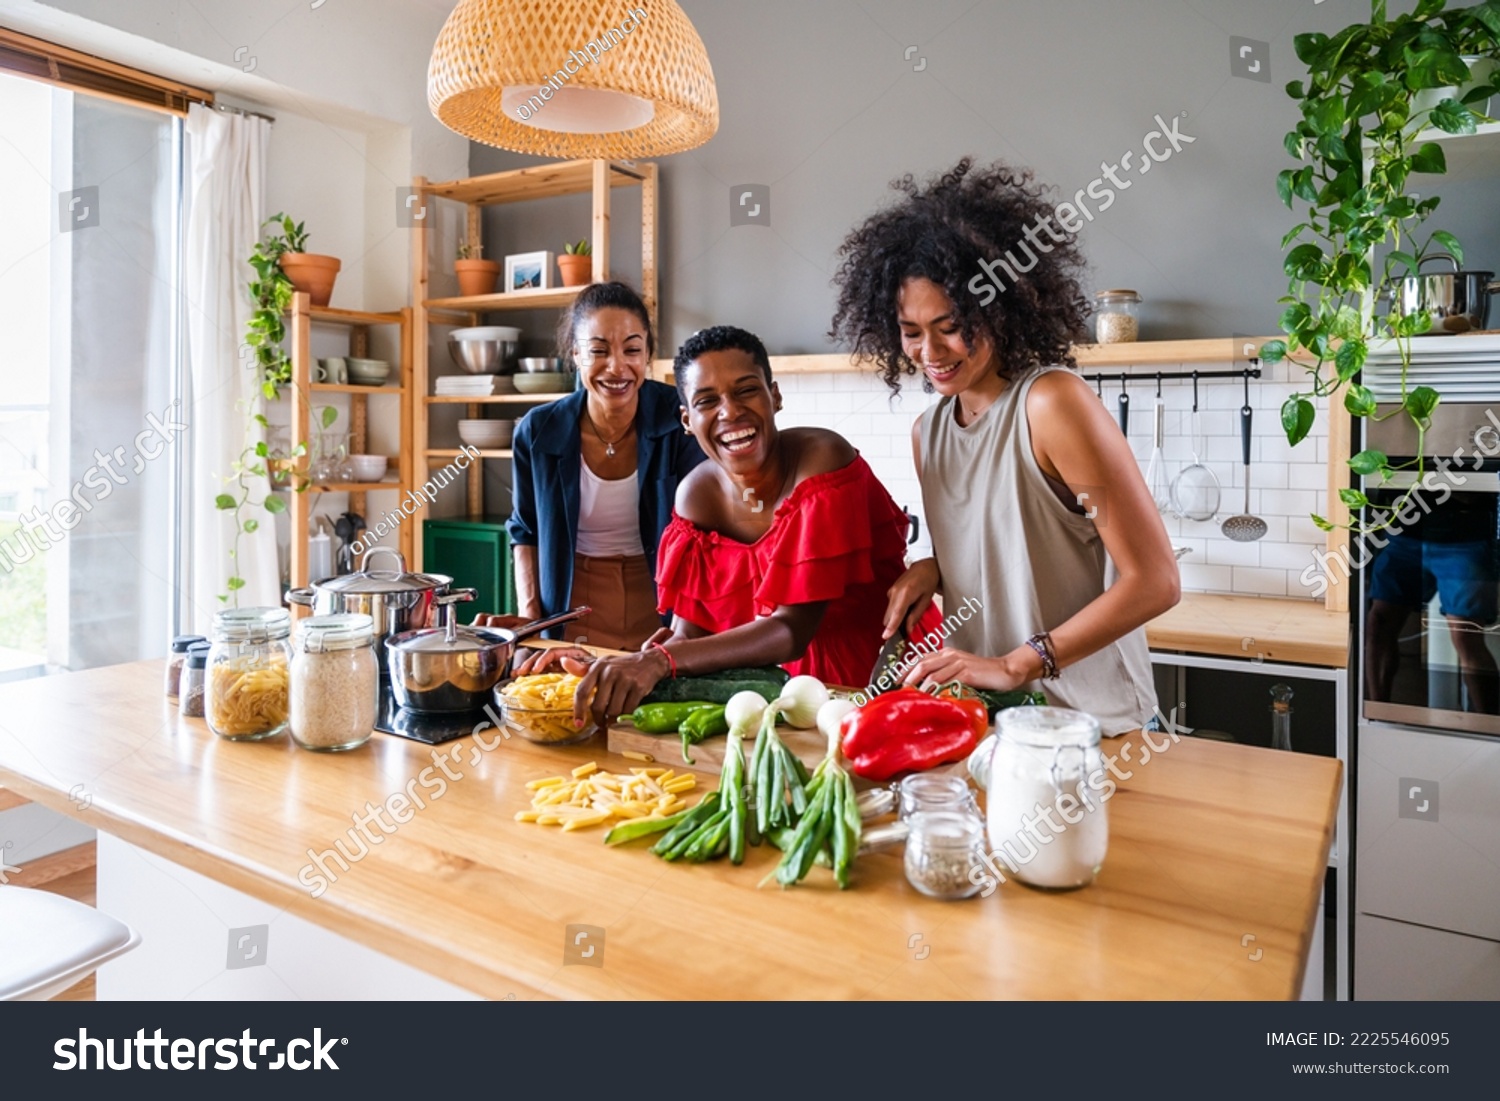 Happy beautiful hispanic south american and black women meeting indoors and having fun - Black adult females best friends spending time together, concepts about domestic life, leisure, friendship #2225546095